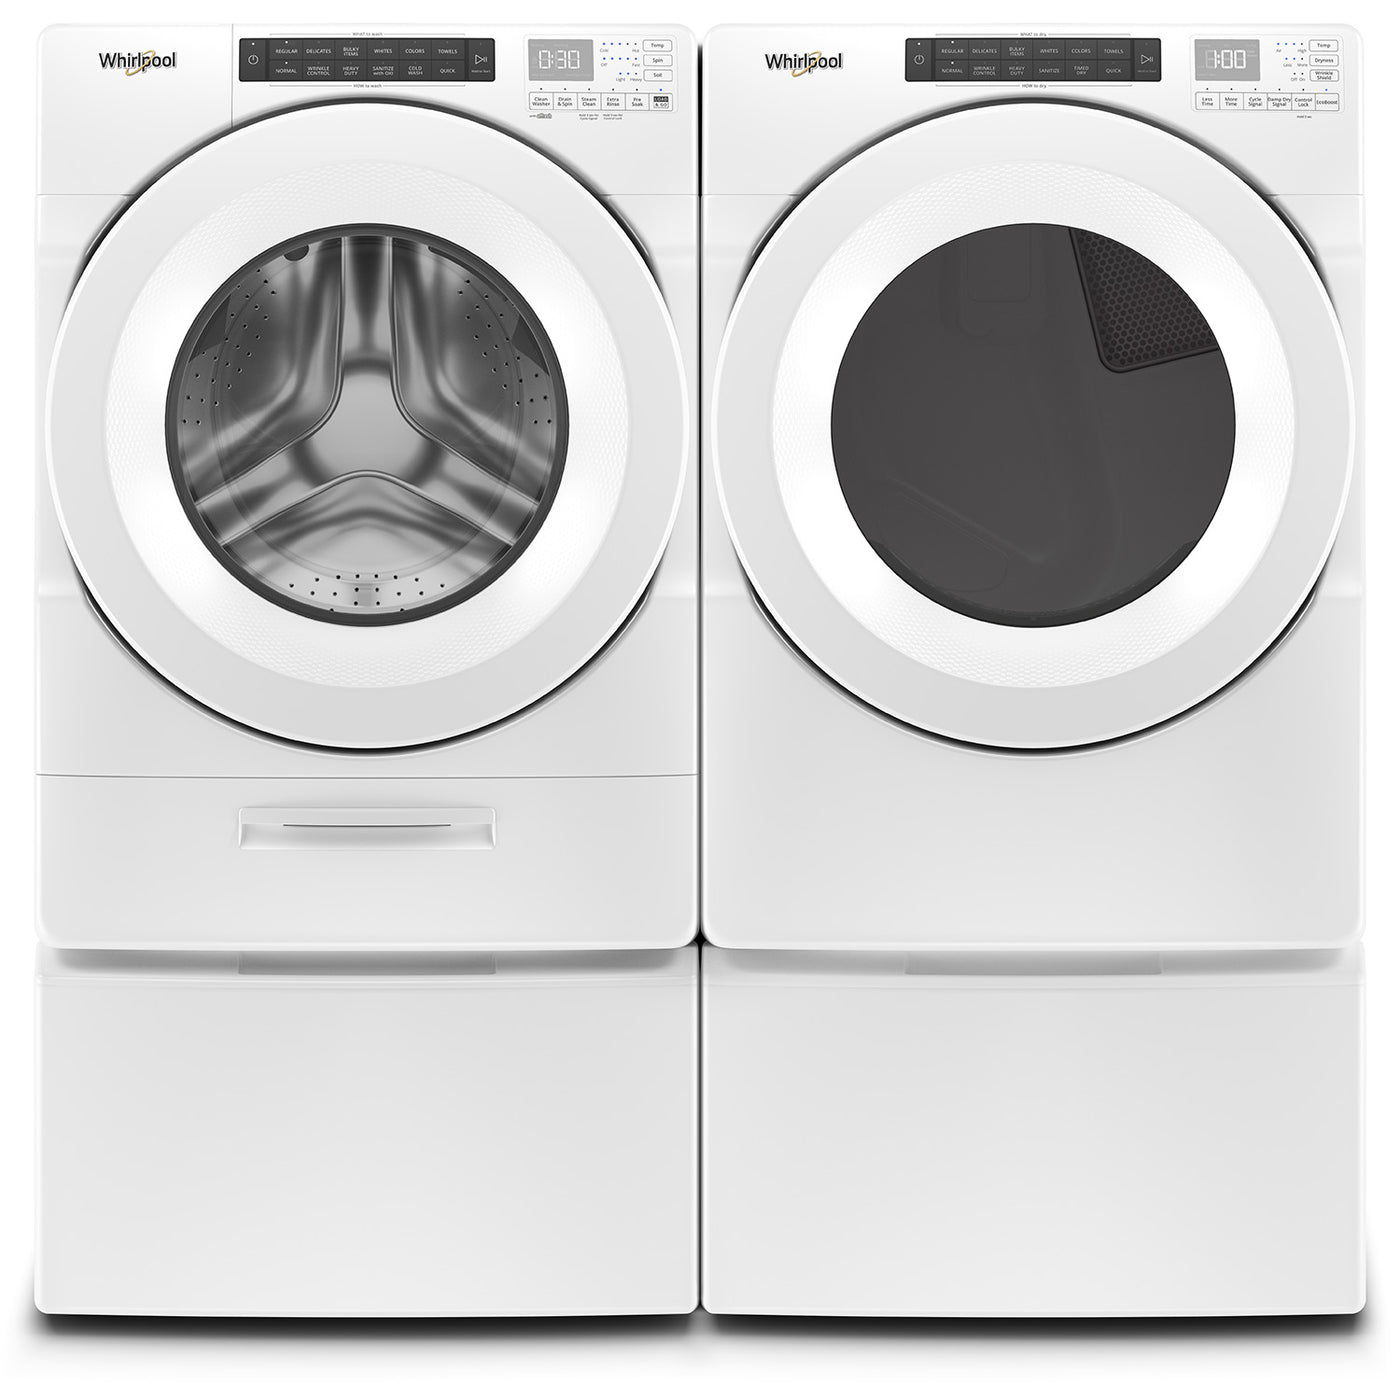 Whirlpool White Front-Load Washer (5.0 cu. ft.) & Electric Dryer 7.4 cu. ft.) - WFW560CHW/YWED560LHW